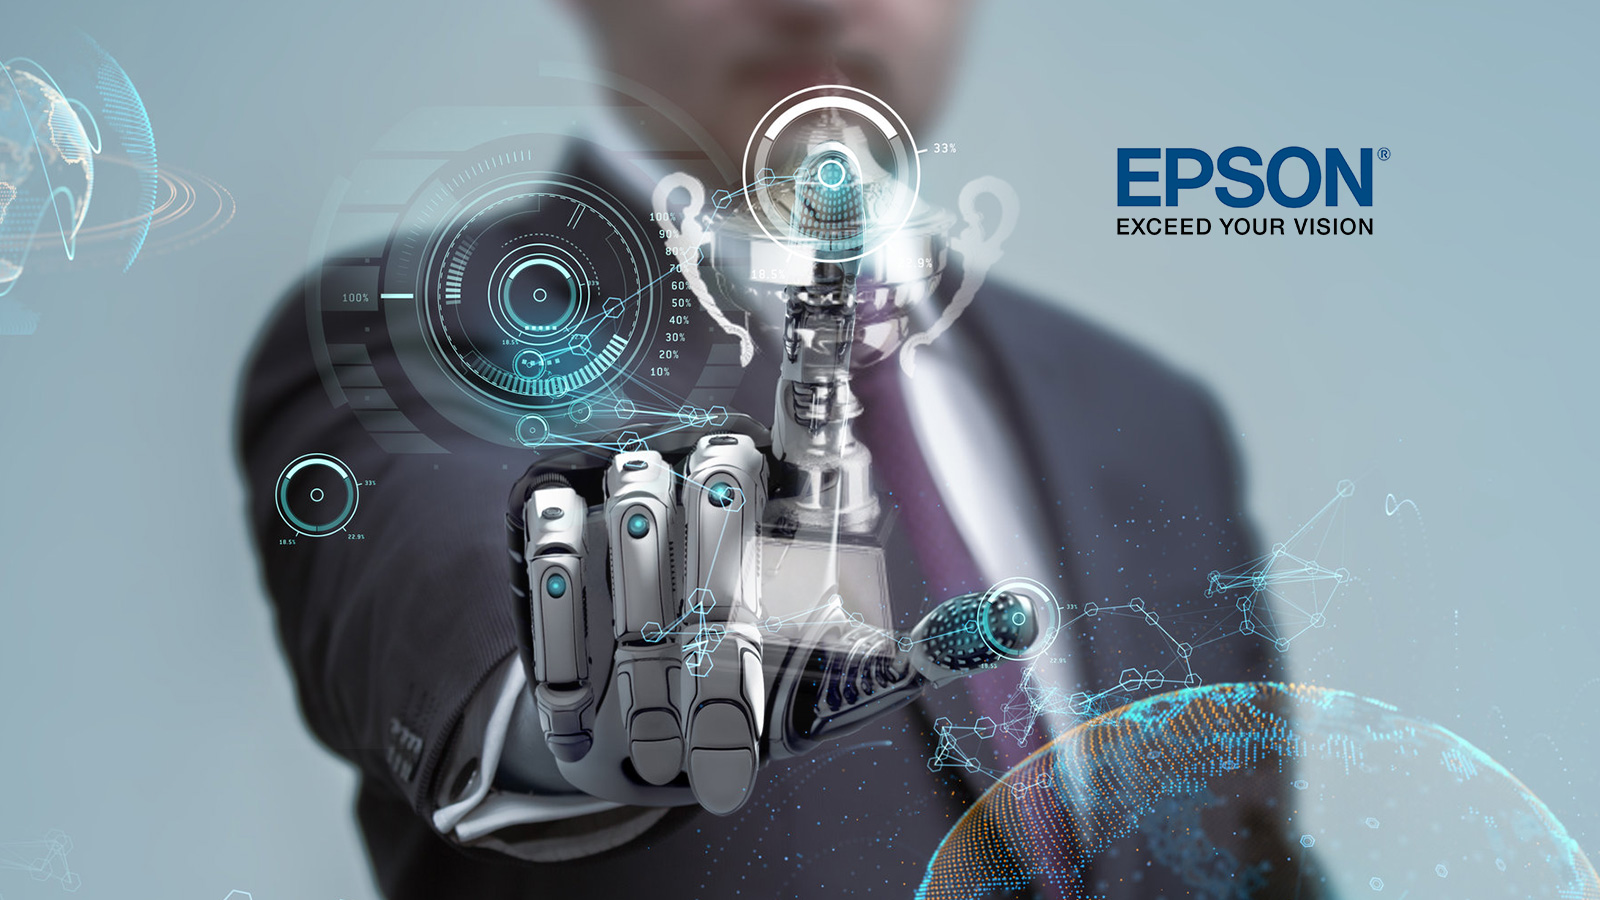 Epson To Showcase Award Winning Line Of SCARA And 6 Axis Robots At Automate 2019